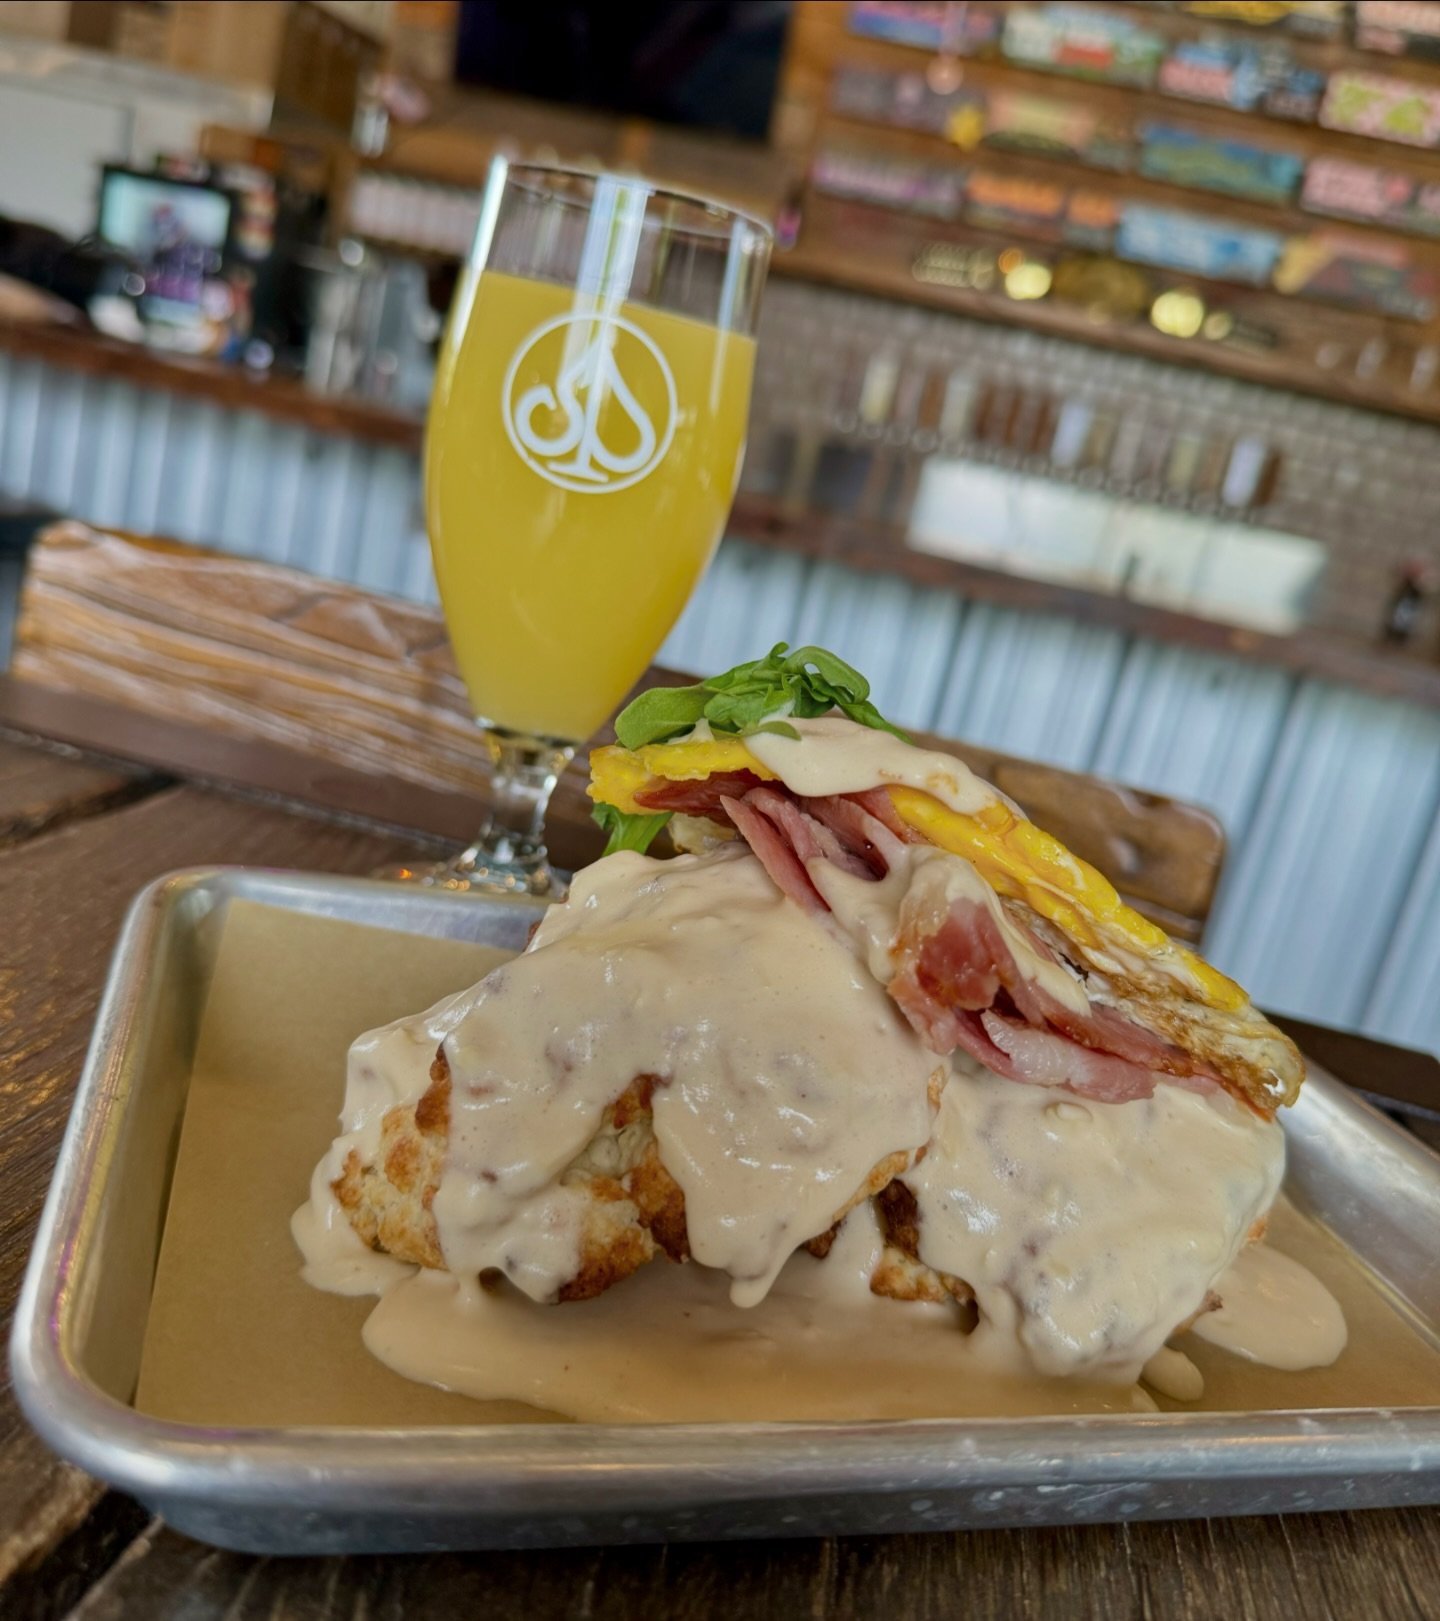 It&rsquo;s a brunch flex. Today - 11am-3pm. 

🍺 Taproom &amp; Patio 11am-7pm
🍳 @twistedeatstruck BRUNCH: 11am-3pm
🍔 REG MENU: 3:30-6pm
🥂 Mims &amp; Mimosa Flights ALL DAY

📸: Beer Cheese &amp; Biscuits - Drop Biscuits smothered with Beer Cheese,